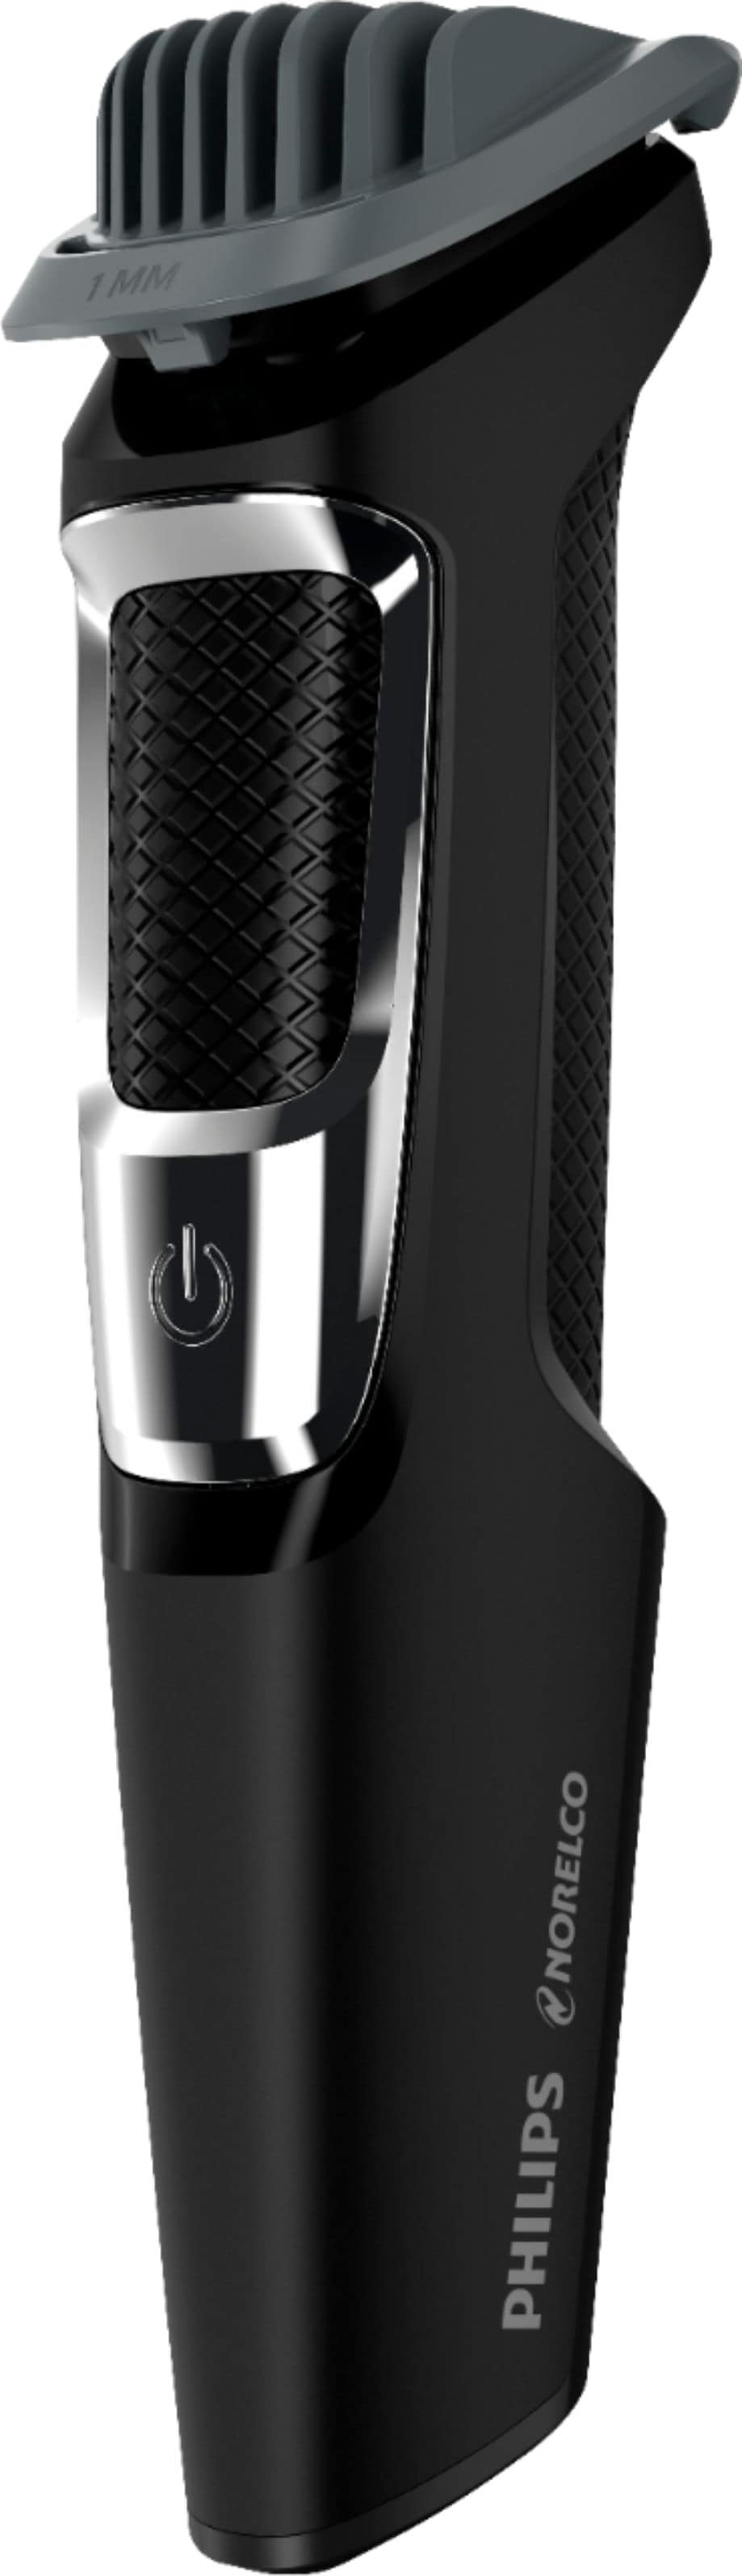 Philips Norelco - Multigroom 3000 Beard, Moustache, Ear and Nose Trimmer - Black/silver_1